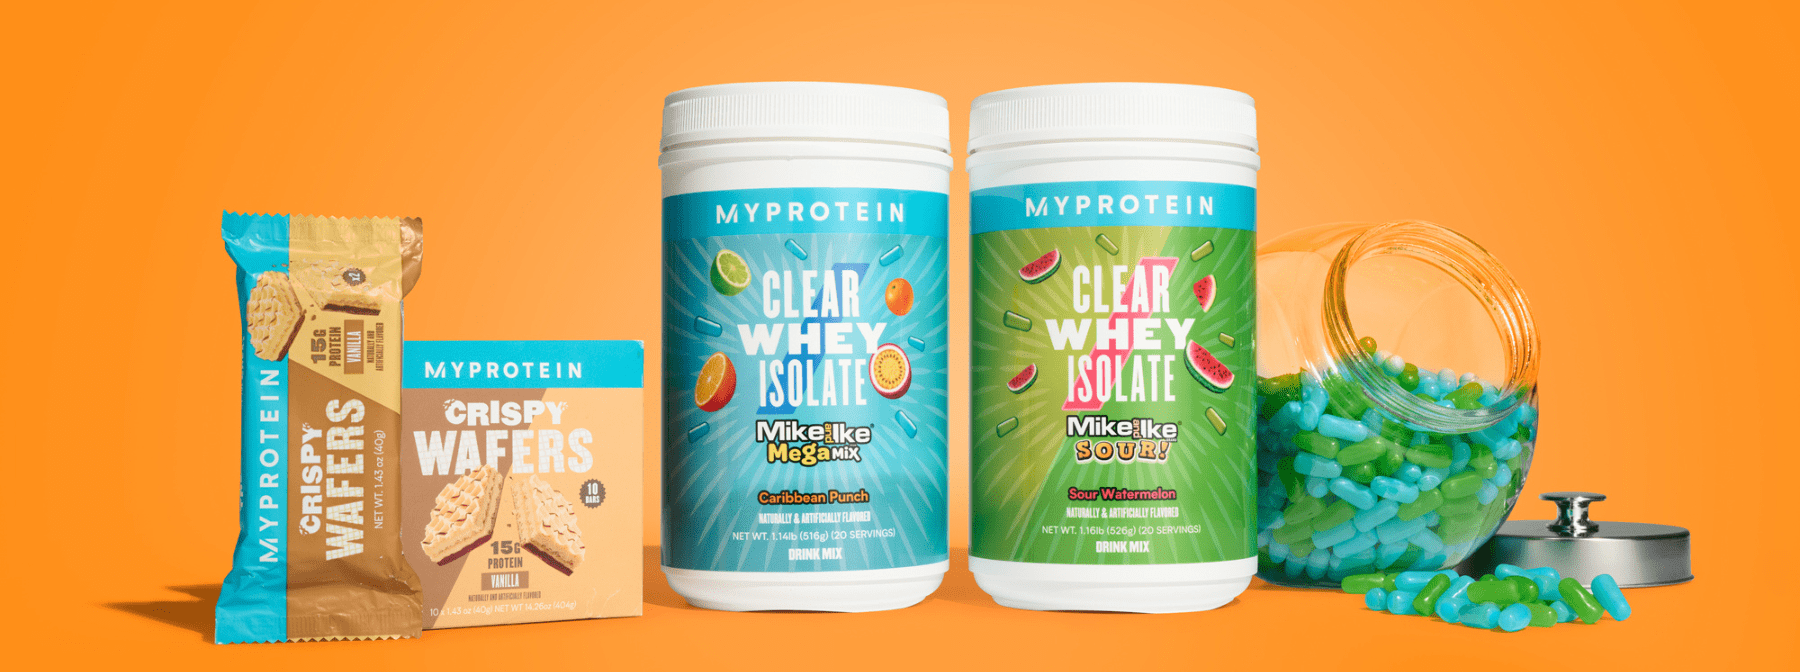 Myprotein Comes to The Vitamin Shoppe